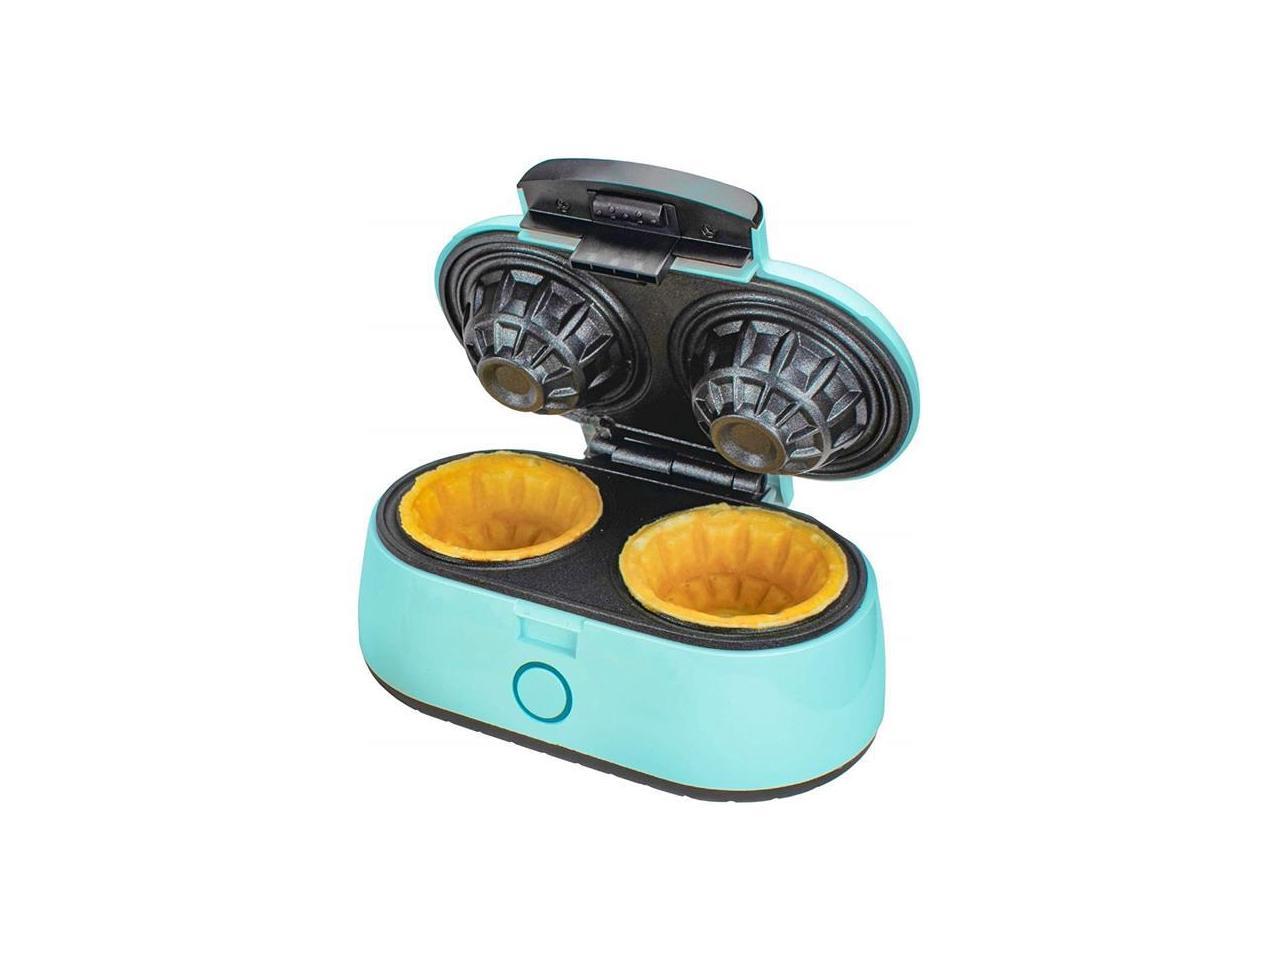 Blue Brentwood TS-1402BL 1000w Double Waffle Bowl Maker Details about   NEW 